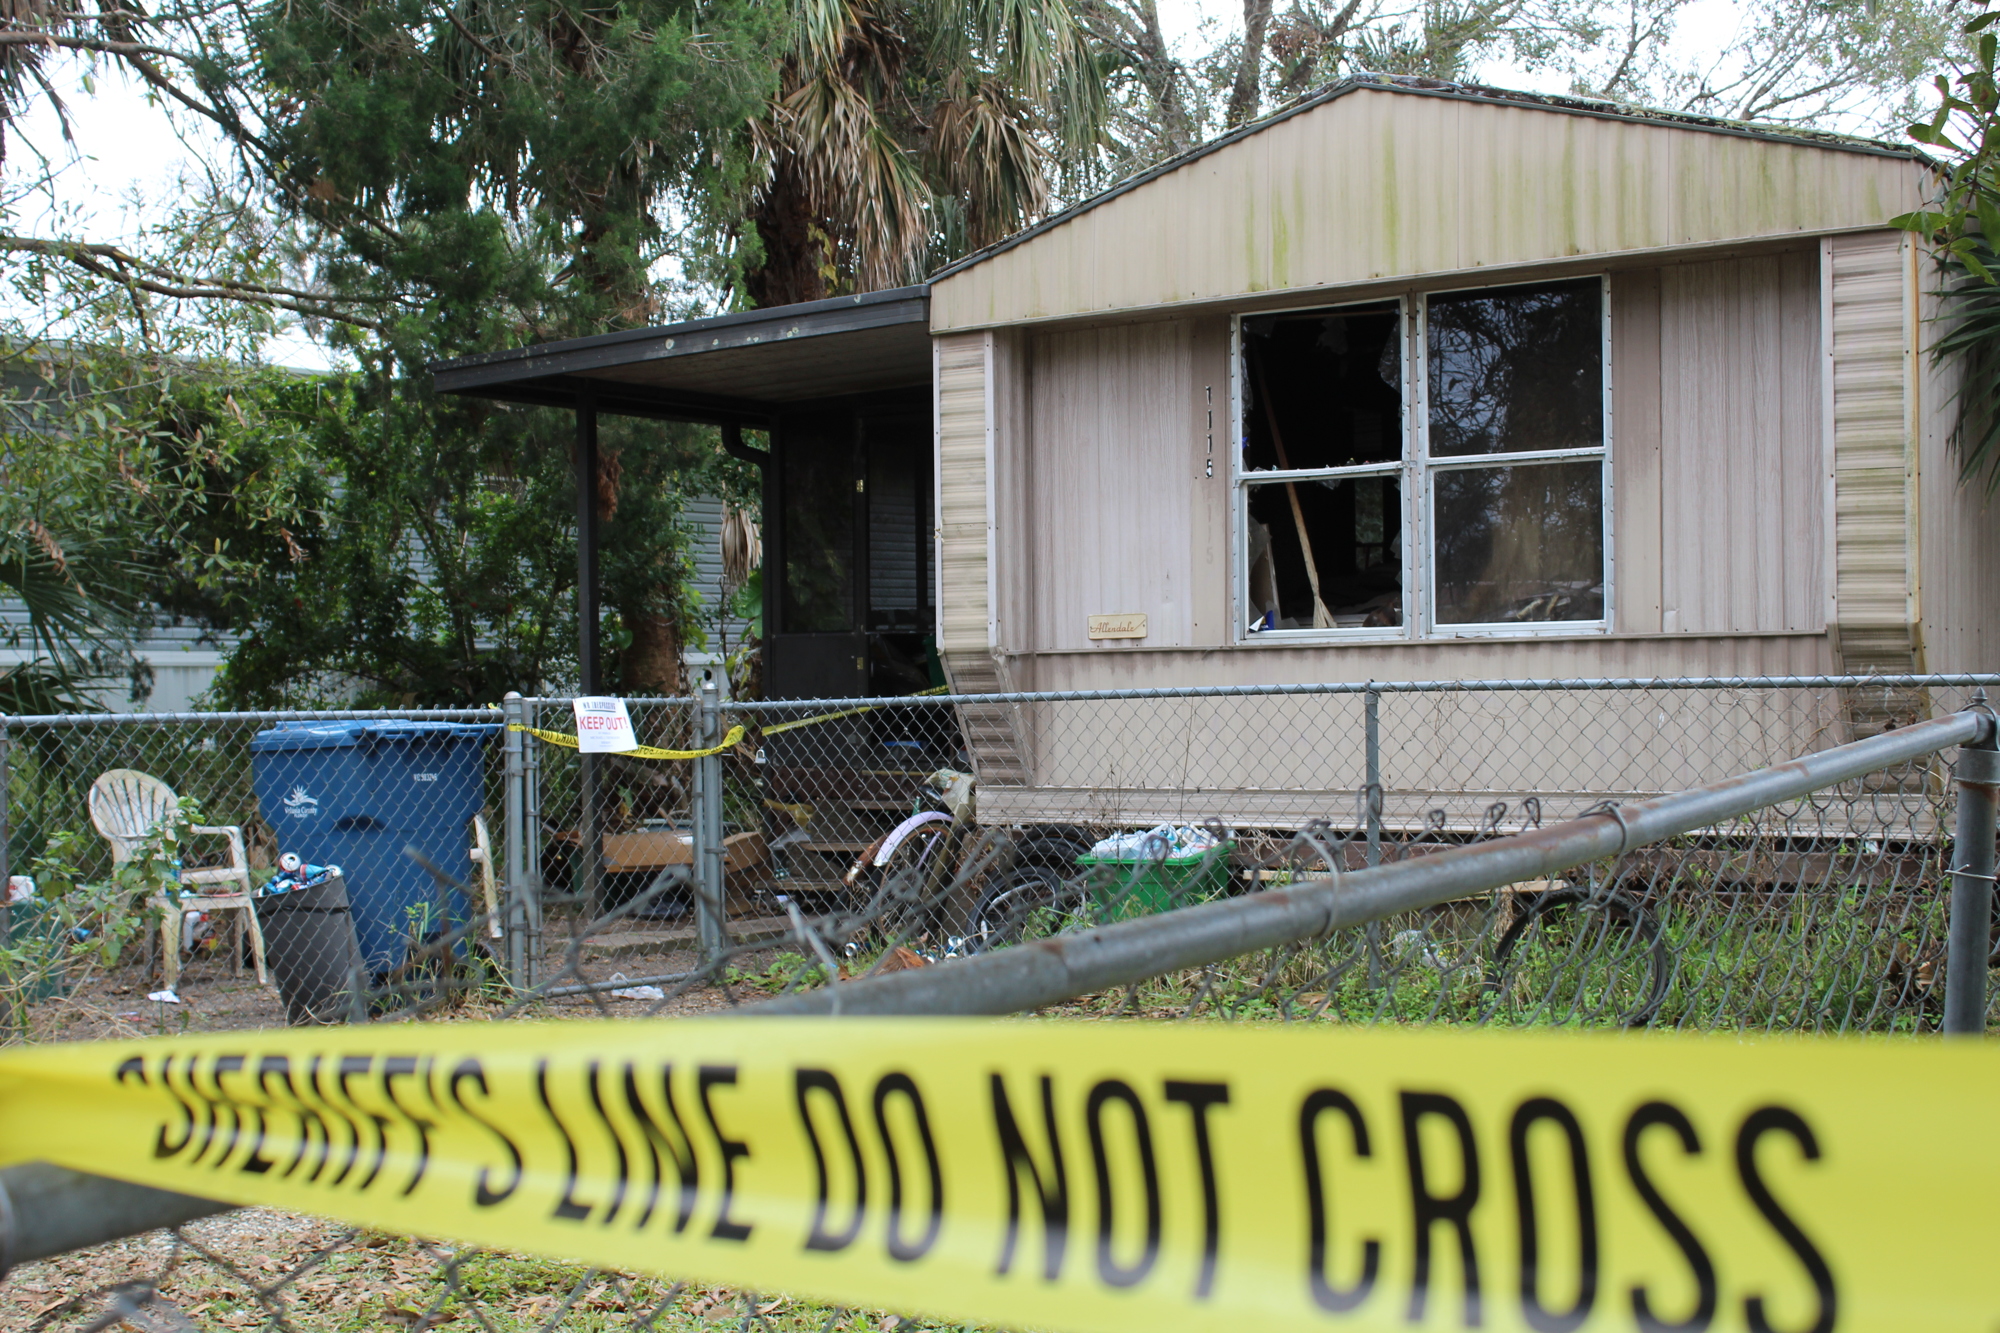 Detectives determined the fire in this Ormond-area mobile home was an accident. Photo by Jarleene Almenas